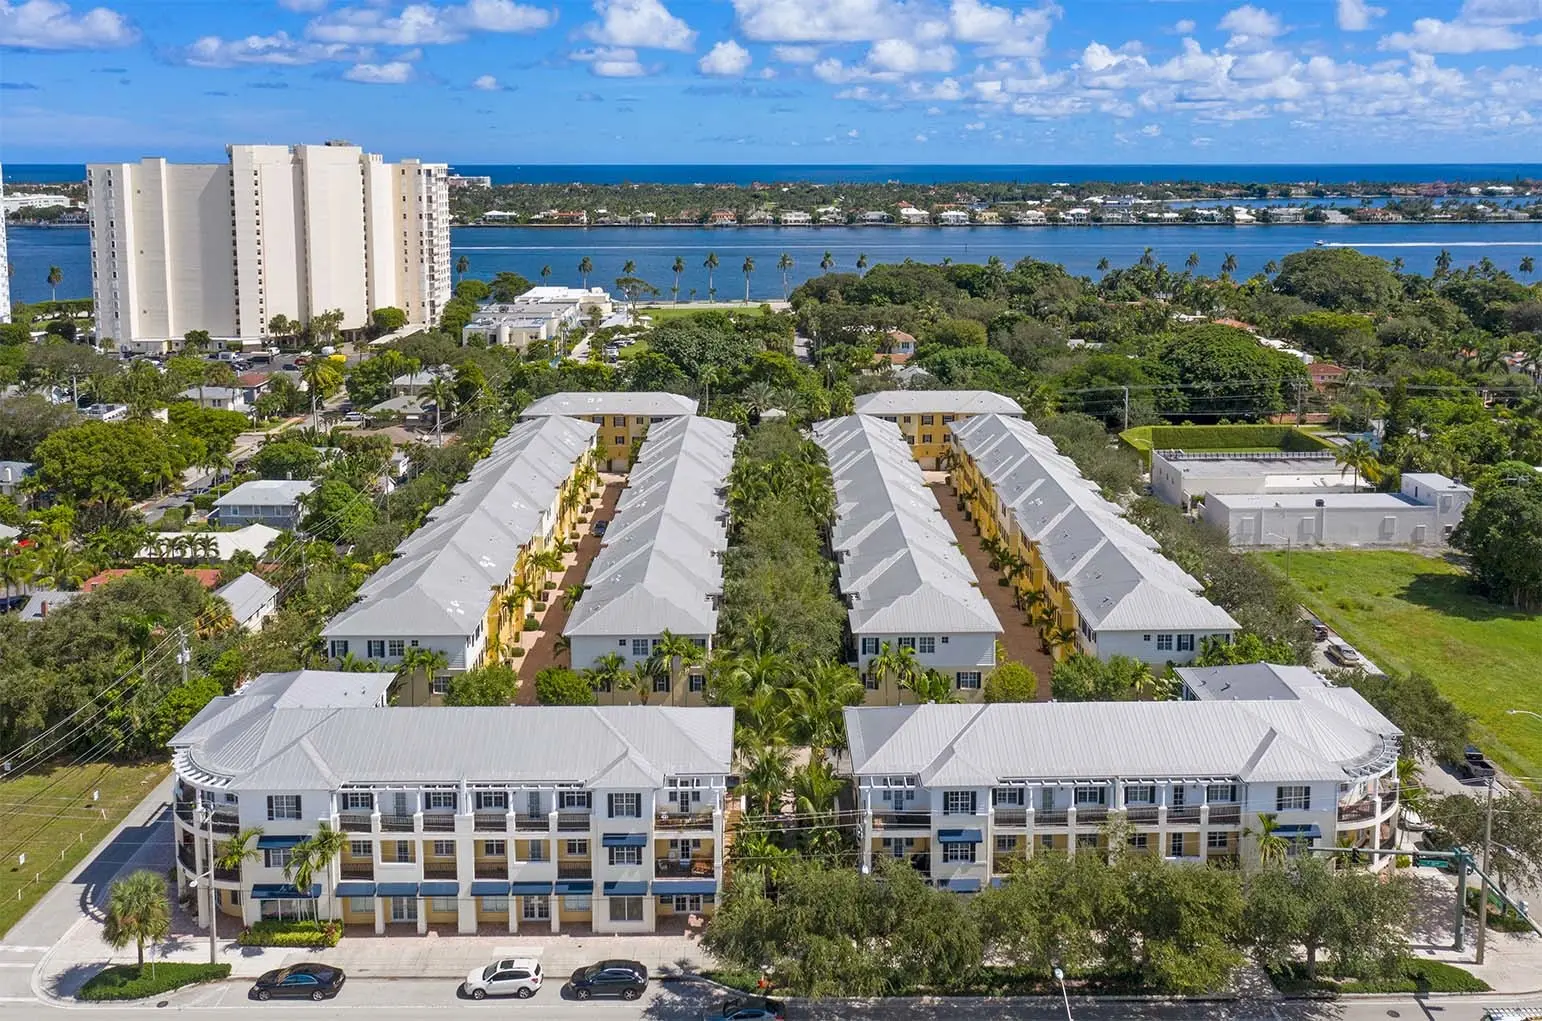 Magnolia Courts Homes for Sale | Homes for Sale in  Magnolia Courts West Palm Beach 